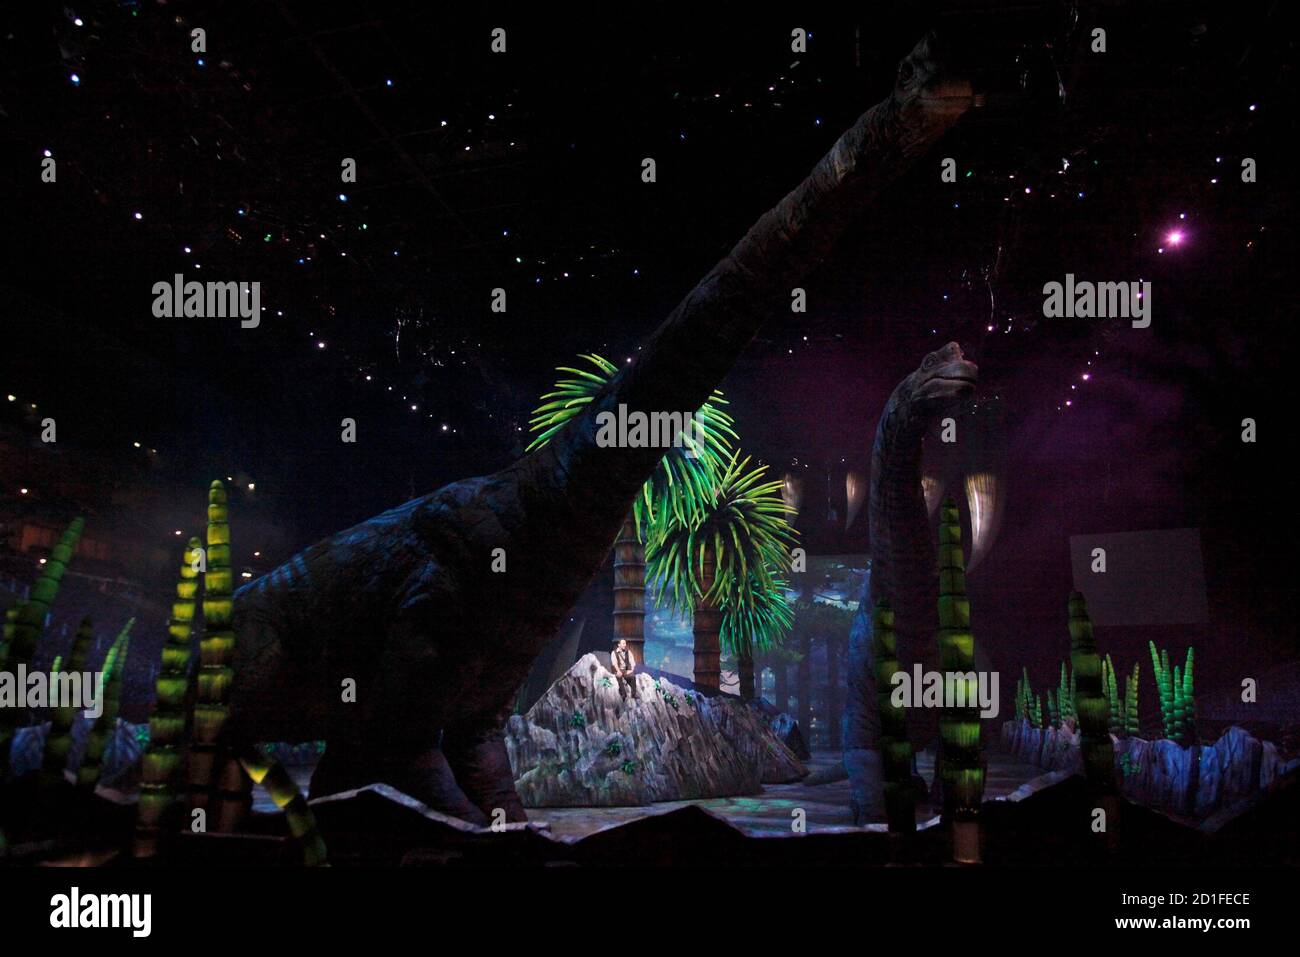 An actor performs during the show Dinosaurier Im Reich der Gigangten (Dinosaurs - In the empire of giants) during a dress rehearsal in Berlin, December 10, 2009. The 15 dinosaurs puppets up to 11 metres high and 17 metres long are partially remote driven in this show running from today until December 13 in the German capital.     REUTERS/Tobias Schwarz     (GERMANY - Tags: ENTERTAINMENT) Stock Photo